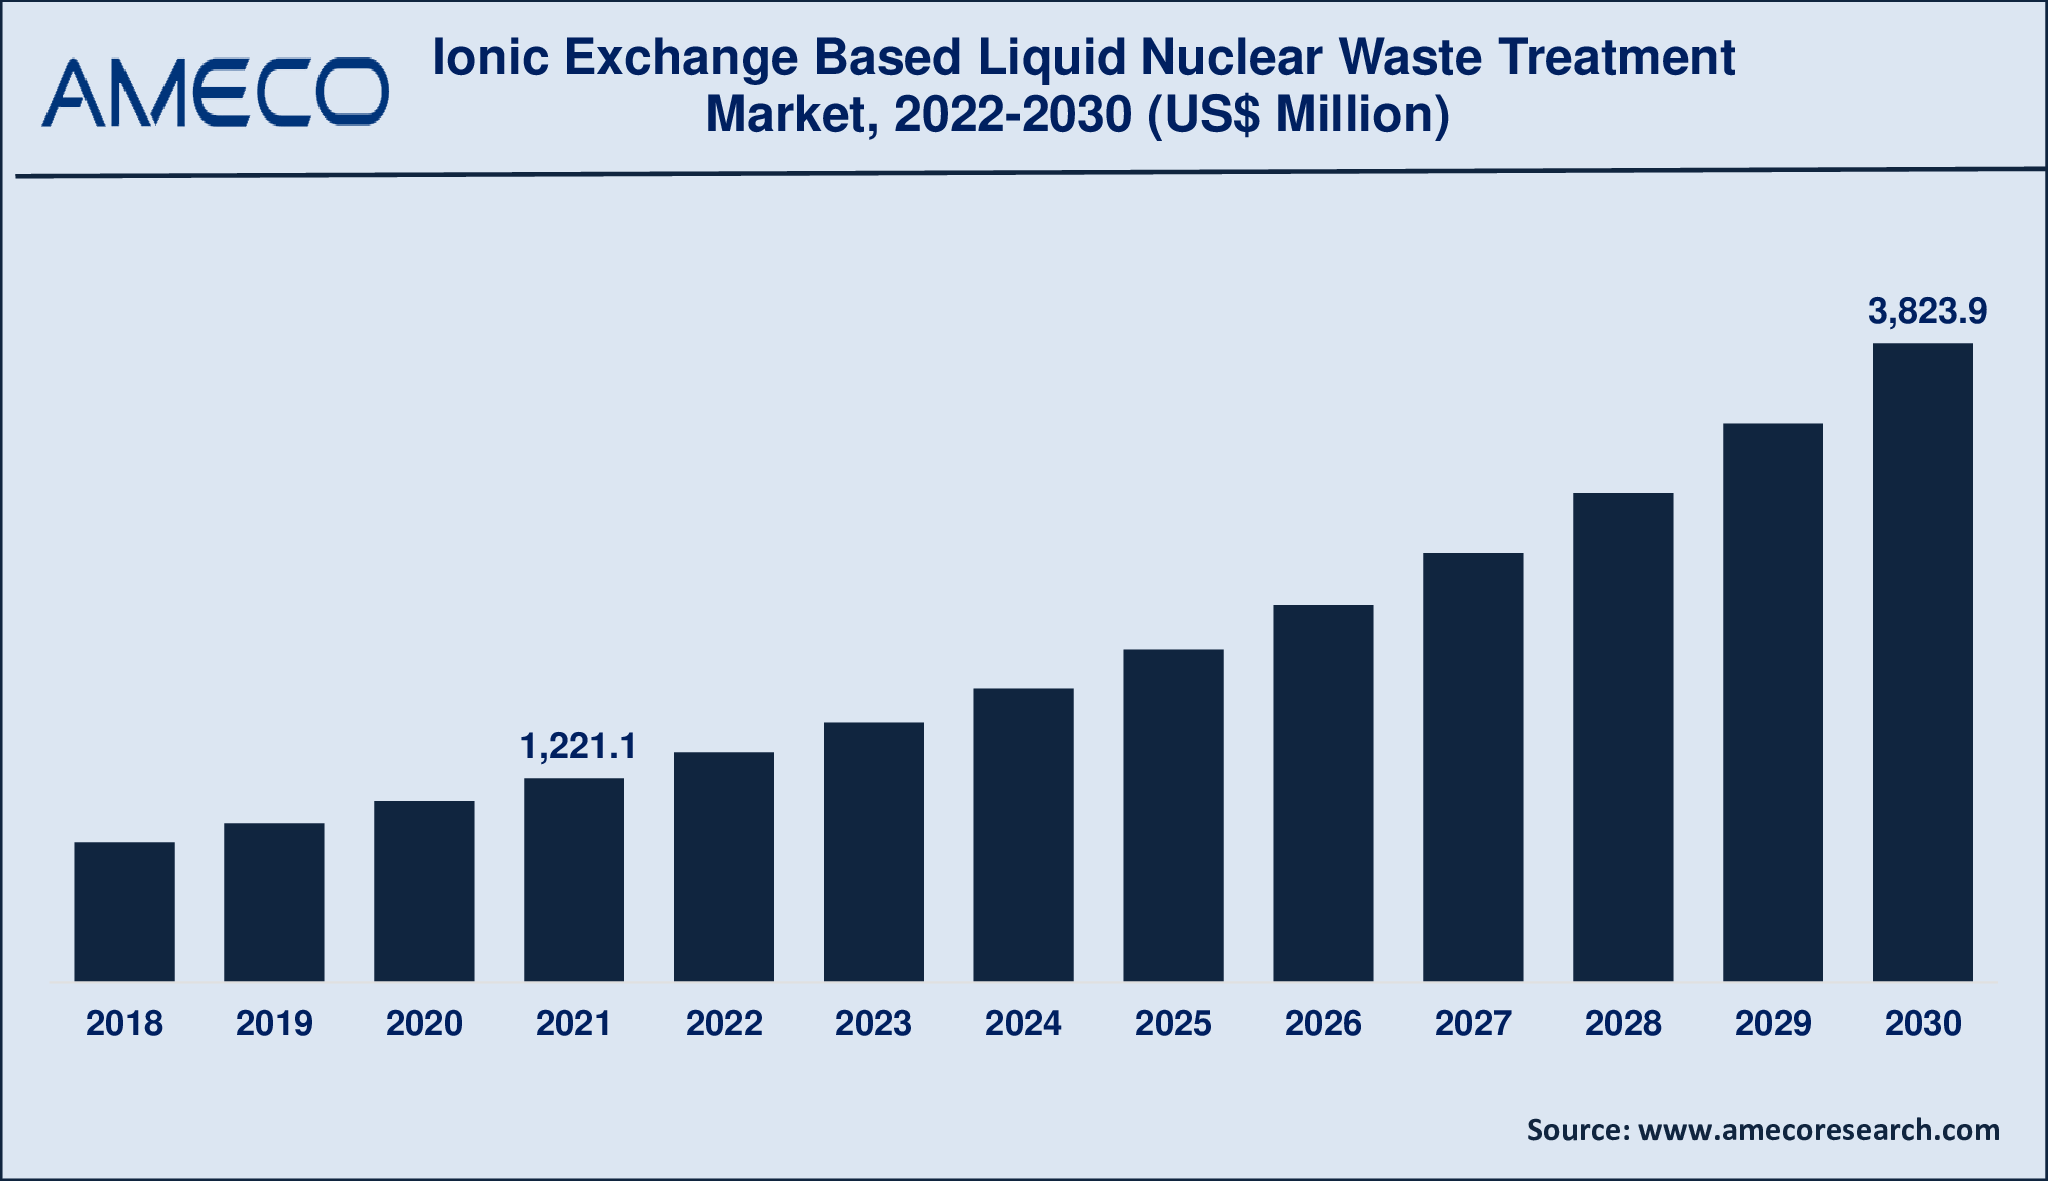 Ionic Exchange Based Liquid Nuclear Waste Treatment Market Size, Share, Growth, Trends, and Forecast 2022-2030